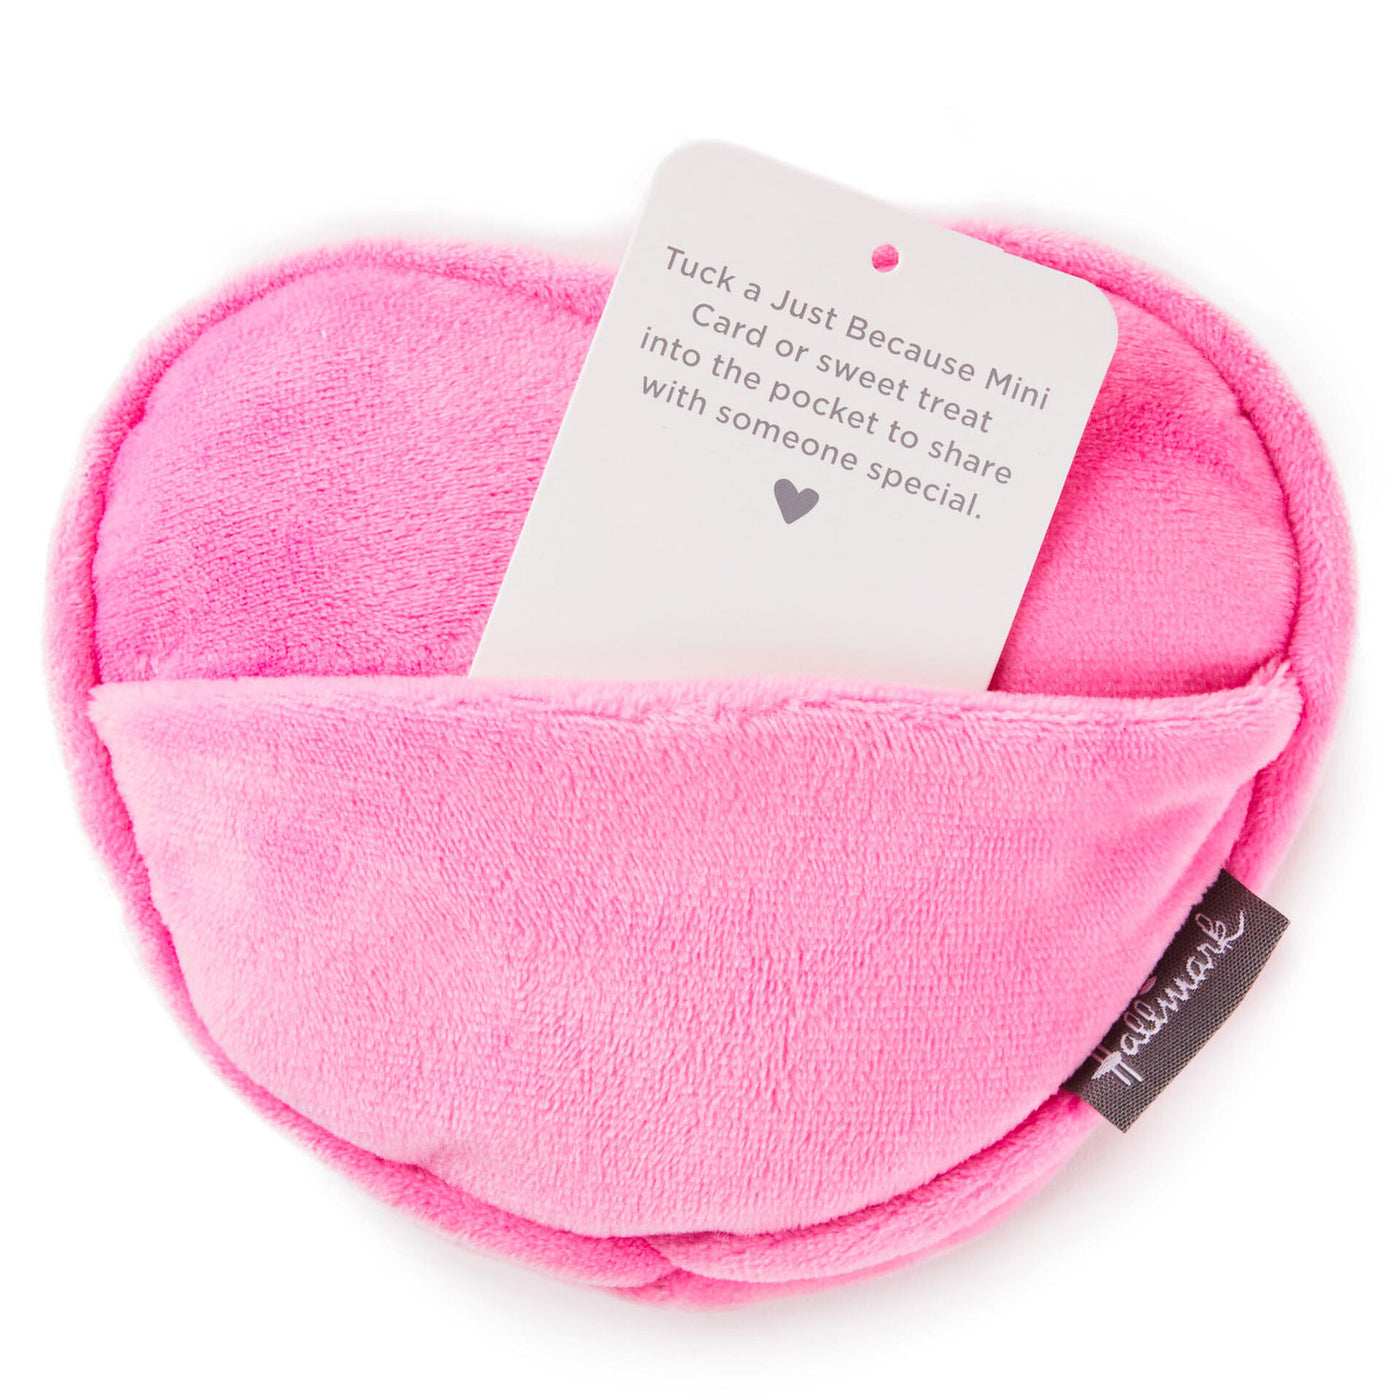 Hallmark Valentine Love XOXO Candy Heart Pink Plush With Pocket New with Tag